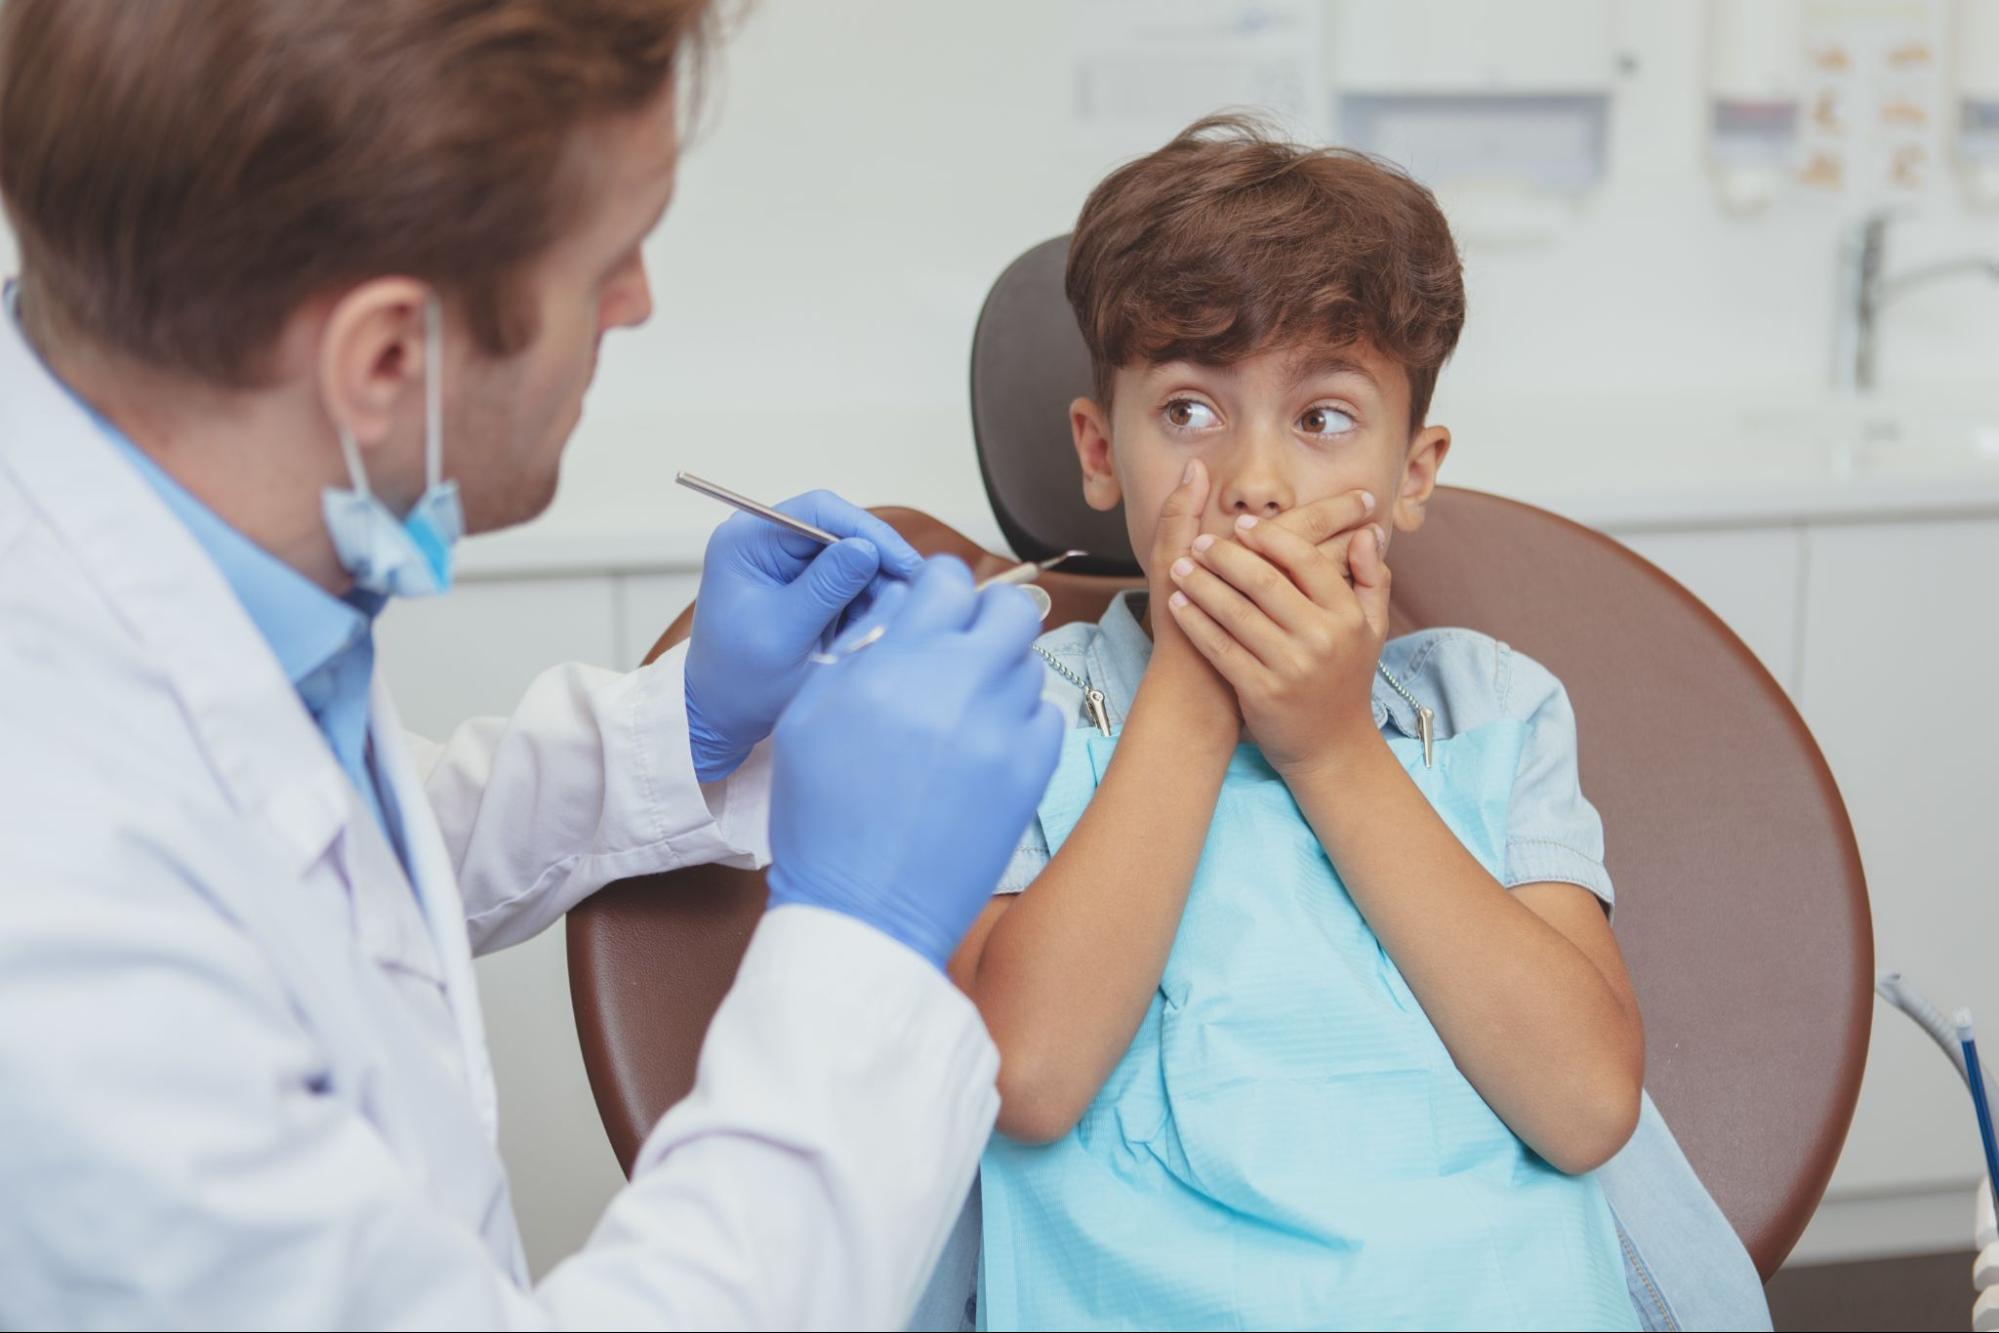 DENTIST WITH PATIENT SITTING IN CHAIR HOLDING HIS MOUTH CLOSED SHOWING HE IS SCARED OF DENTAL TREATMEN